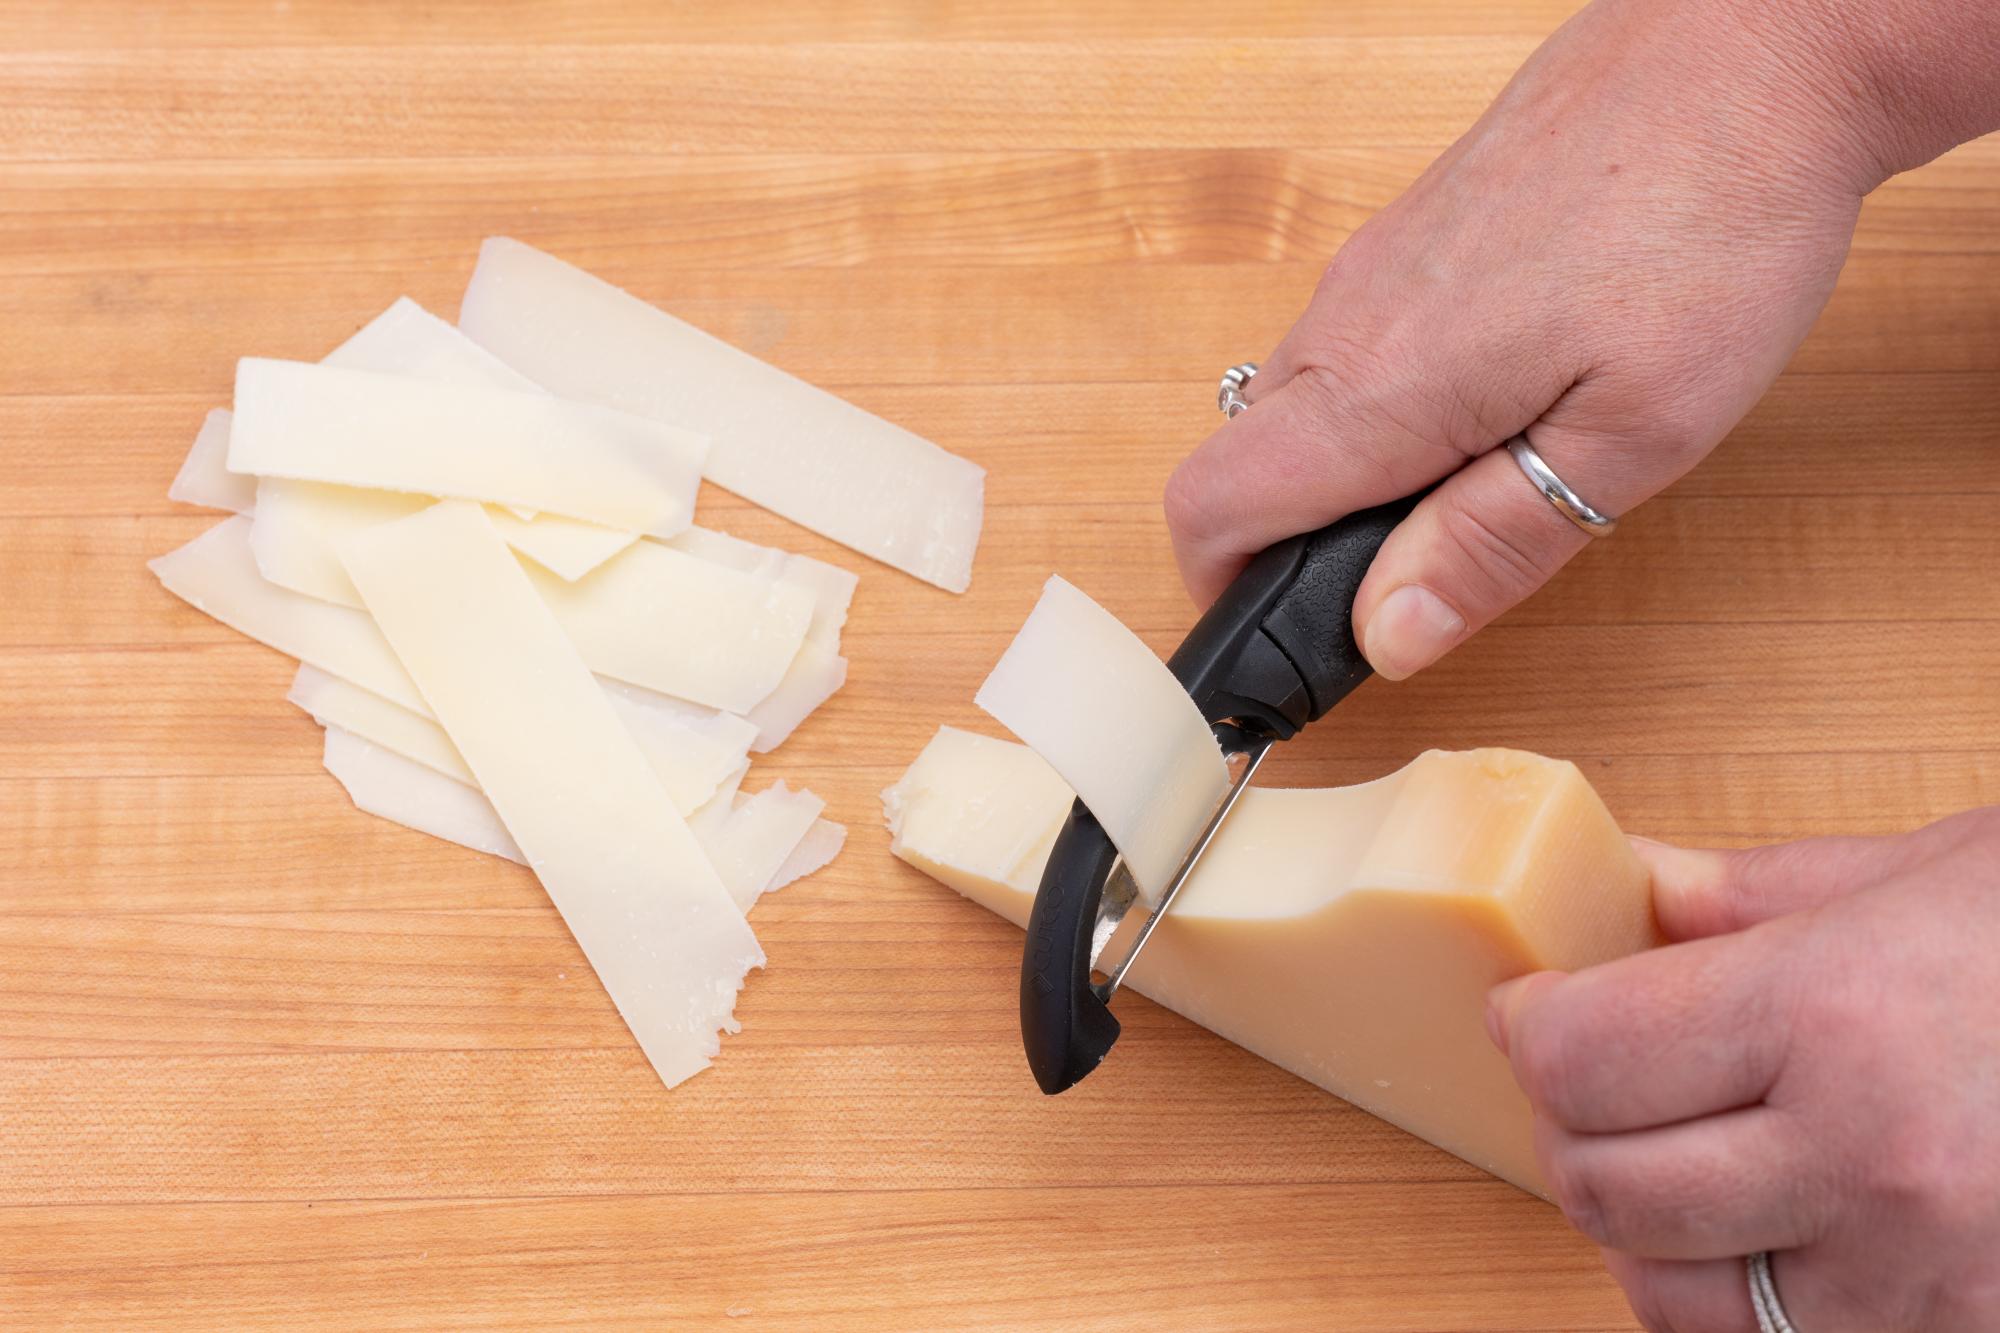 Shaving the parmesan cheese with a Vegetable Peeler.